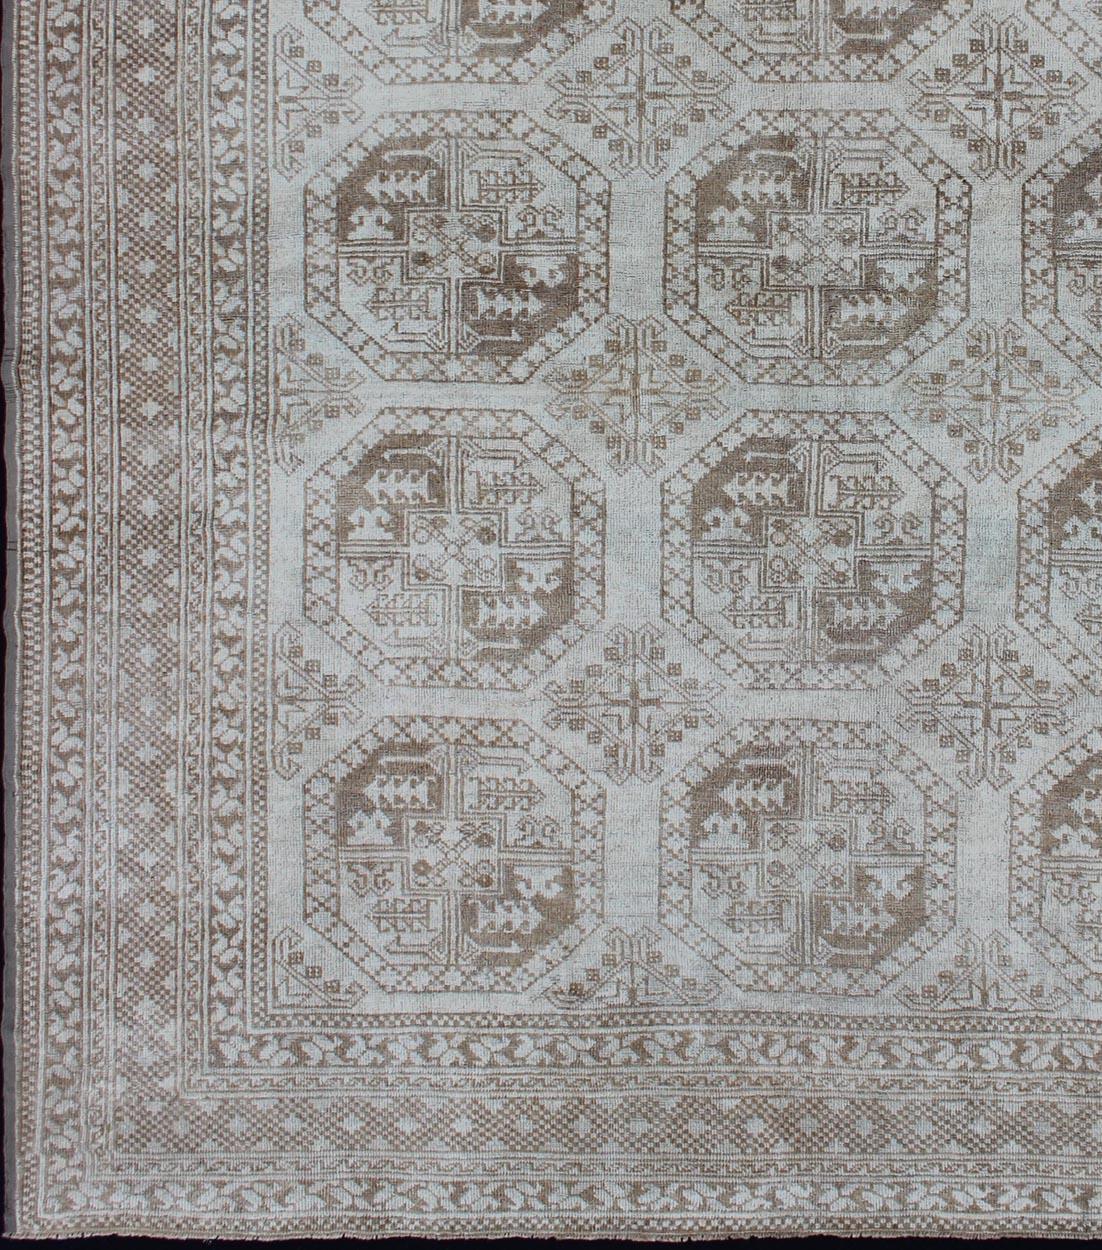 Square shape Antique Turkish rug with Medallion and geometric Solar/Ersari design, rug EN-293, country of origin / type: Turkey / Tribal, circa 1920

Set on a neutral gray-toned background, this tribal design piece features repeating medallions in